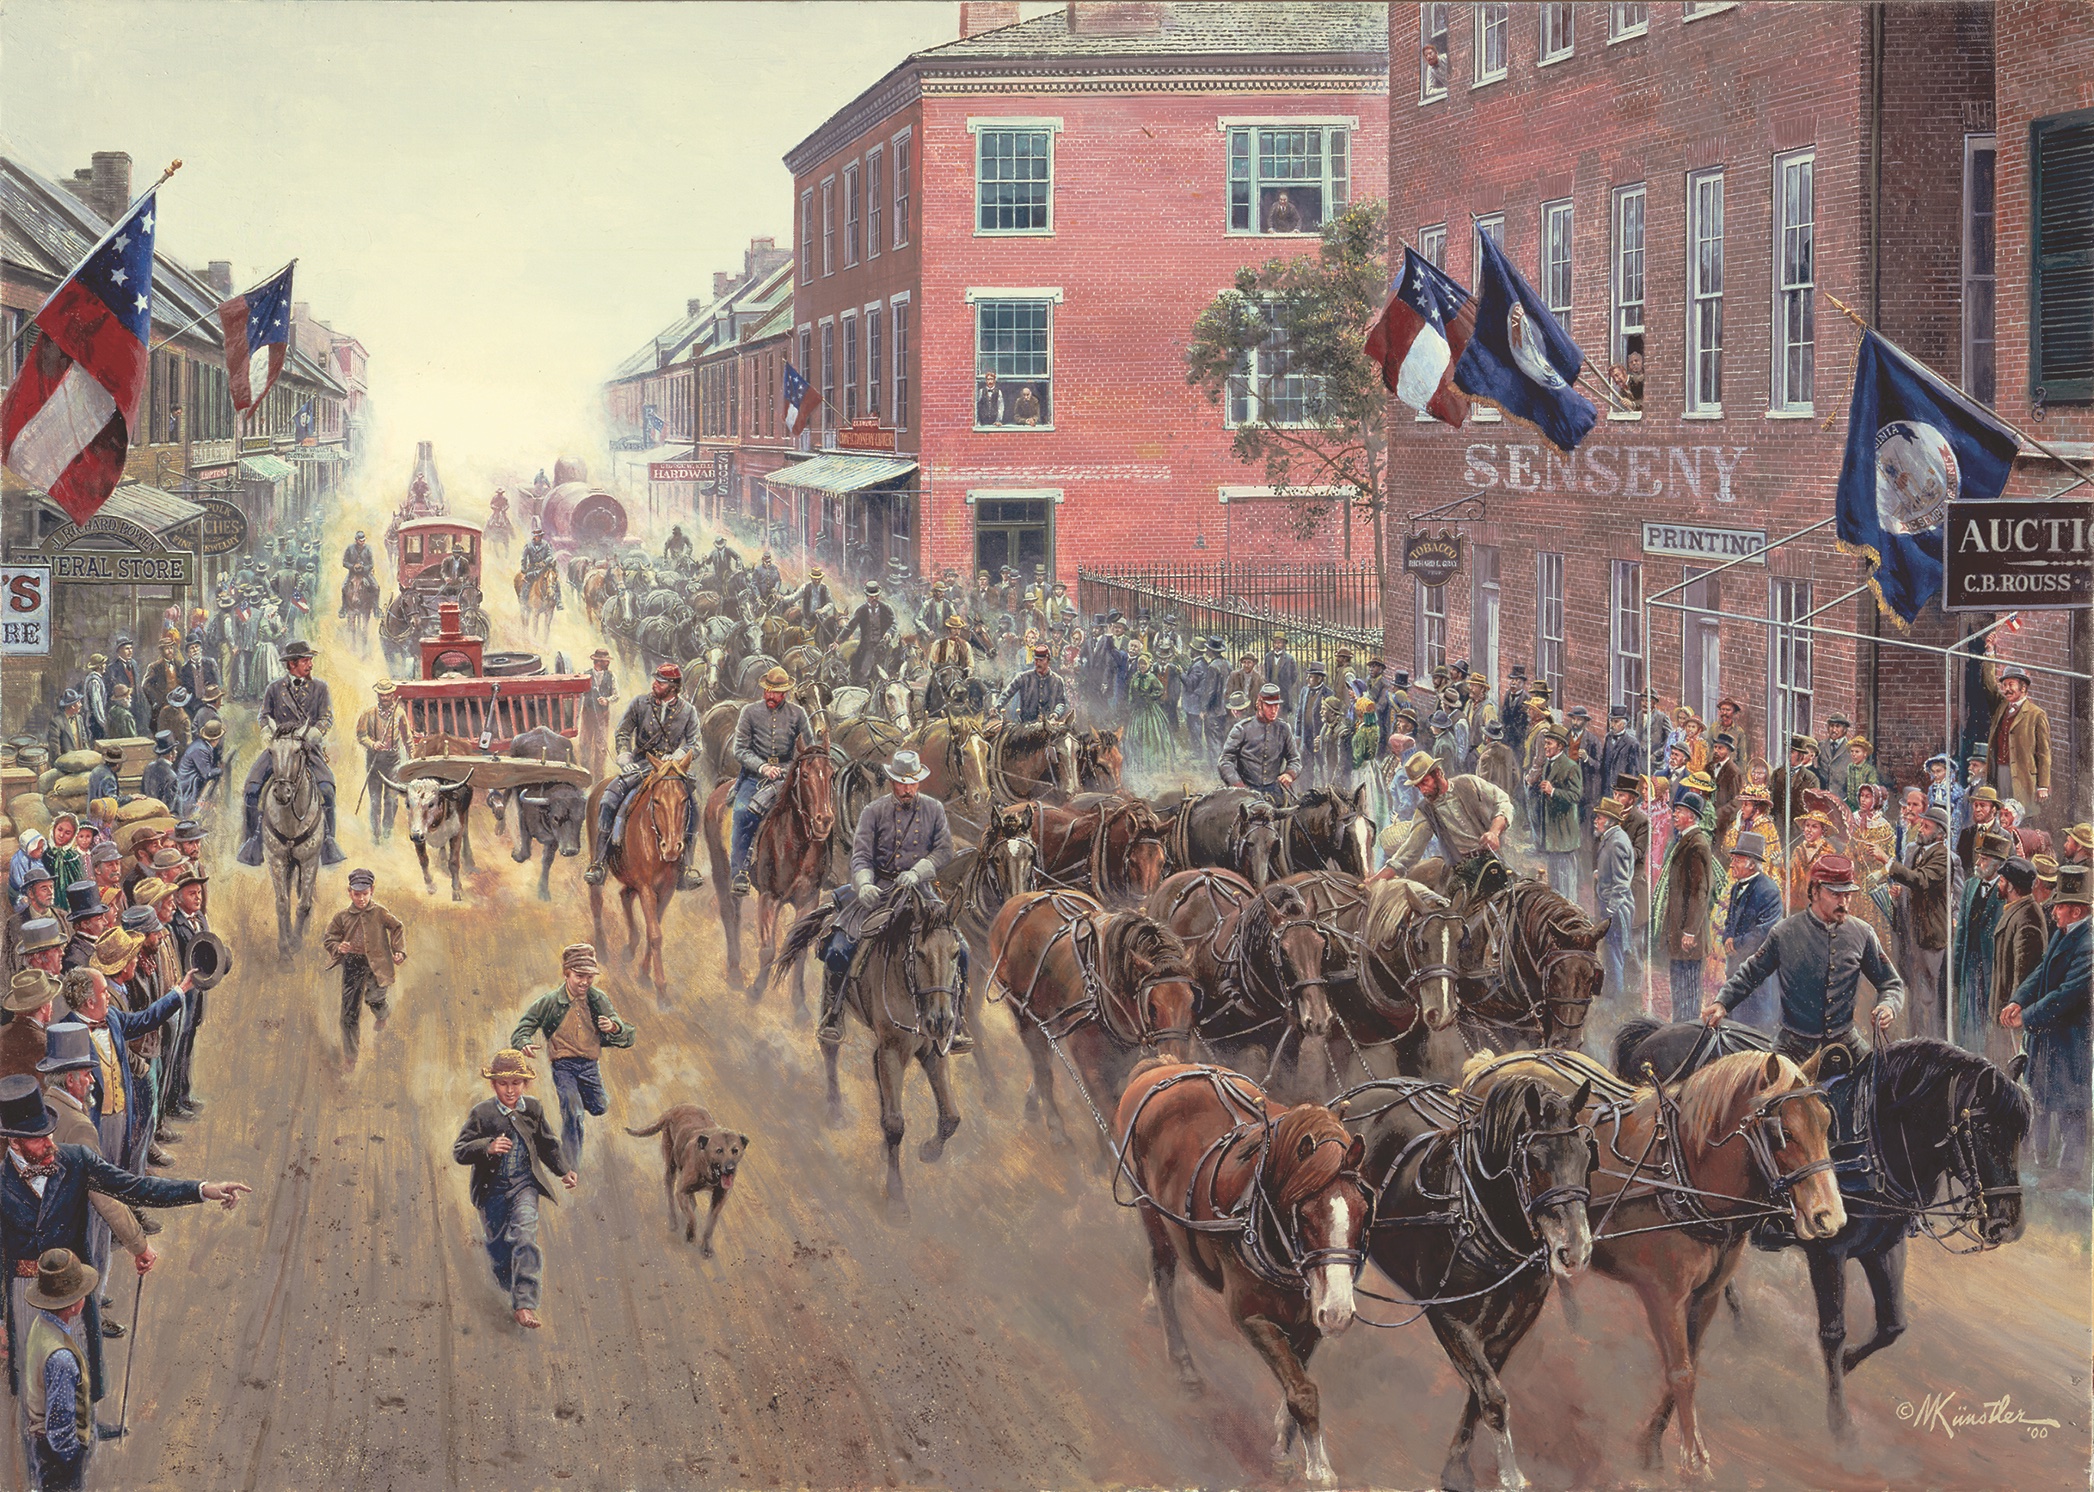 Winchester repeatedly found itself either in Confederate or Union control during the war. Here, Rebel troops traverse the town’s main street before fervent locals. (Iron Horses, Men of Steel by Mort Kunstler ©2000 Mort Kunstler inc., www.mortkunstler.com)